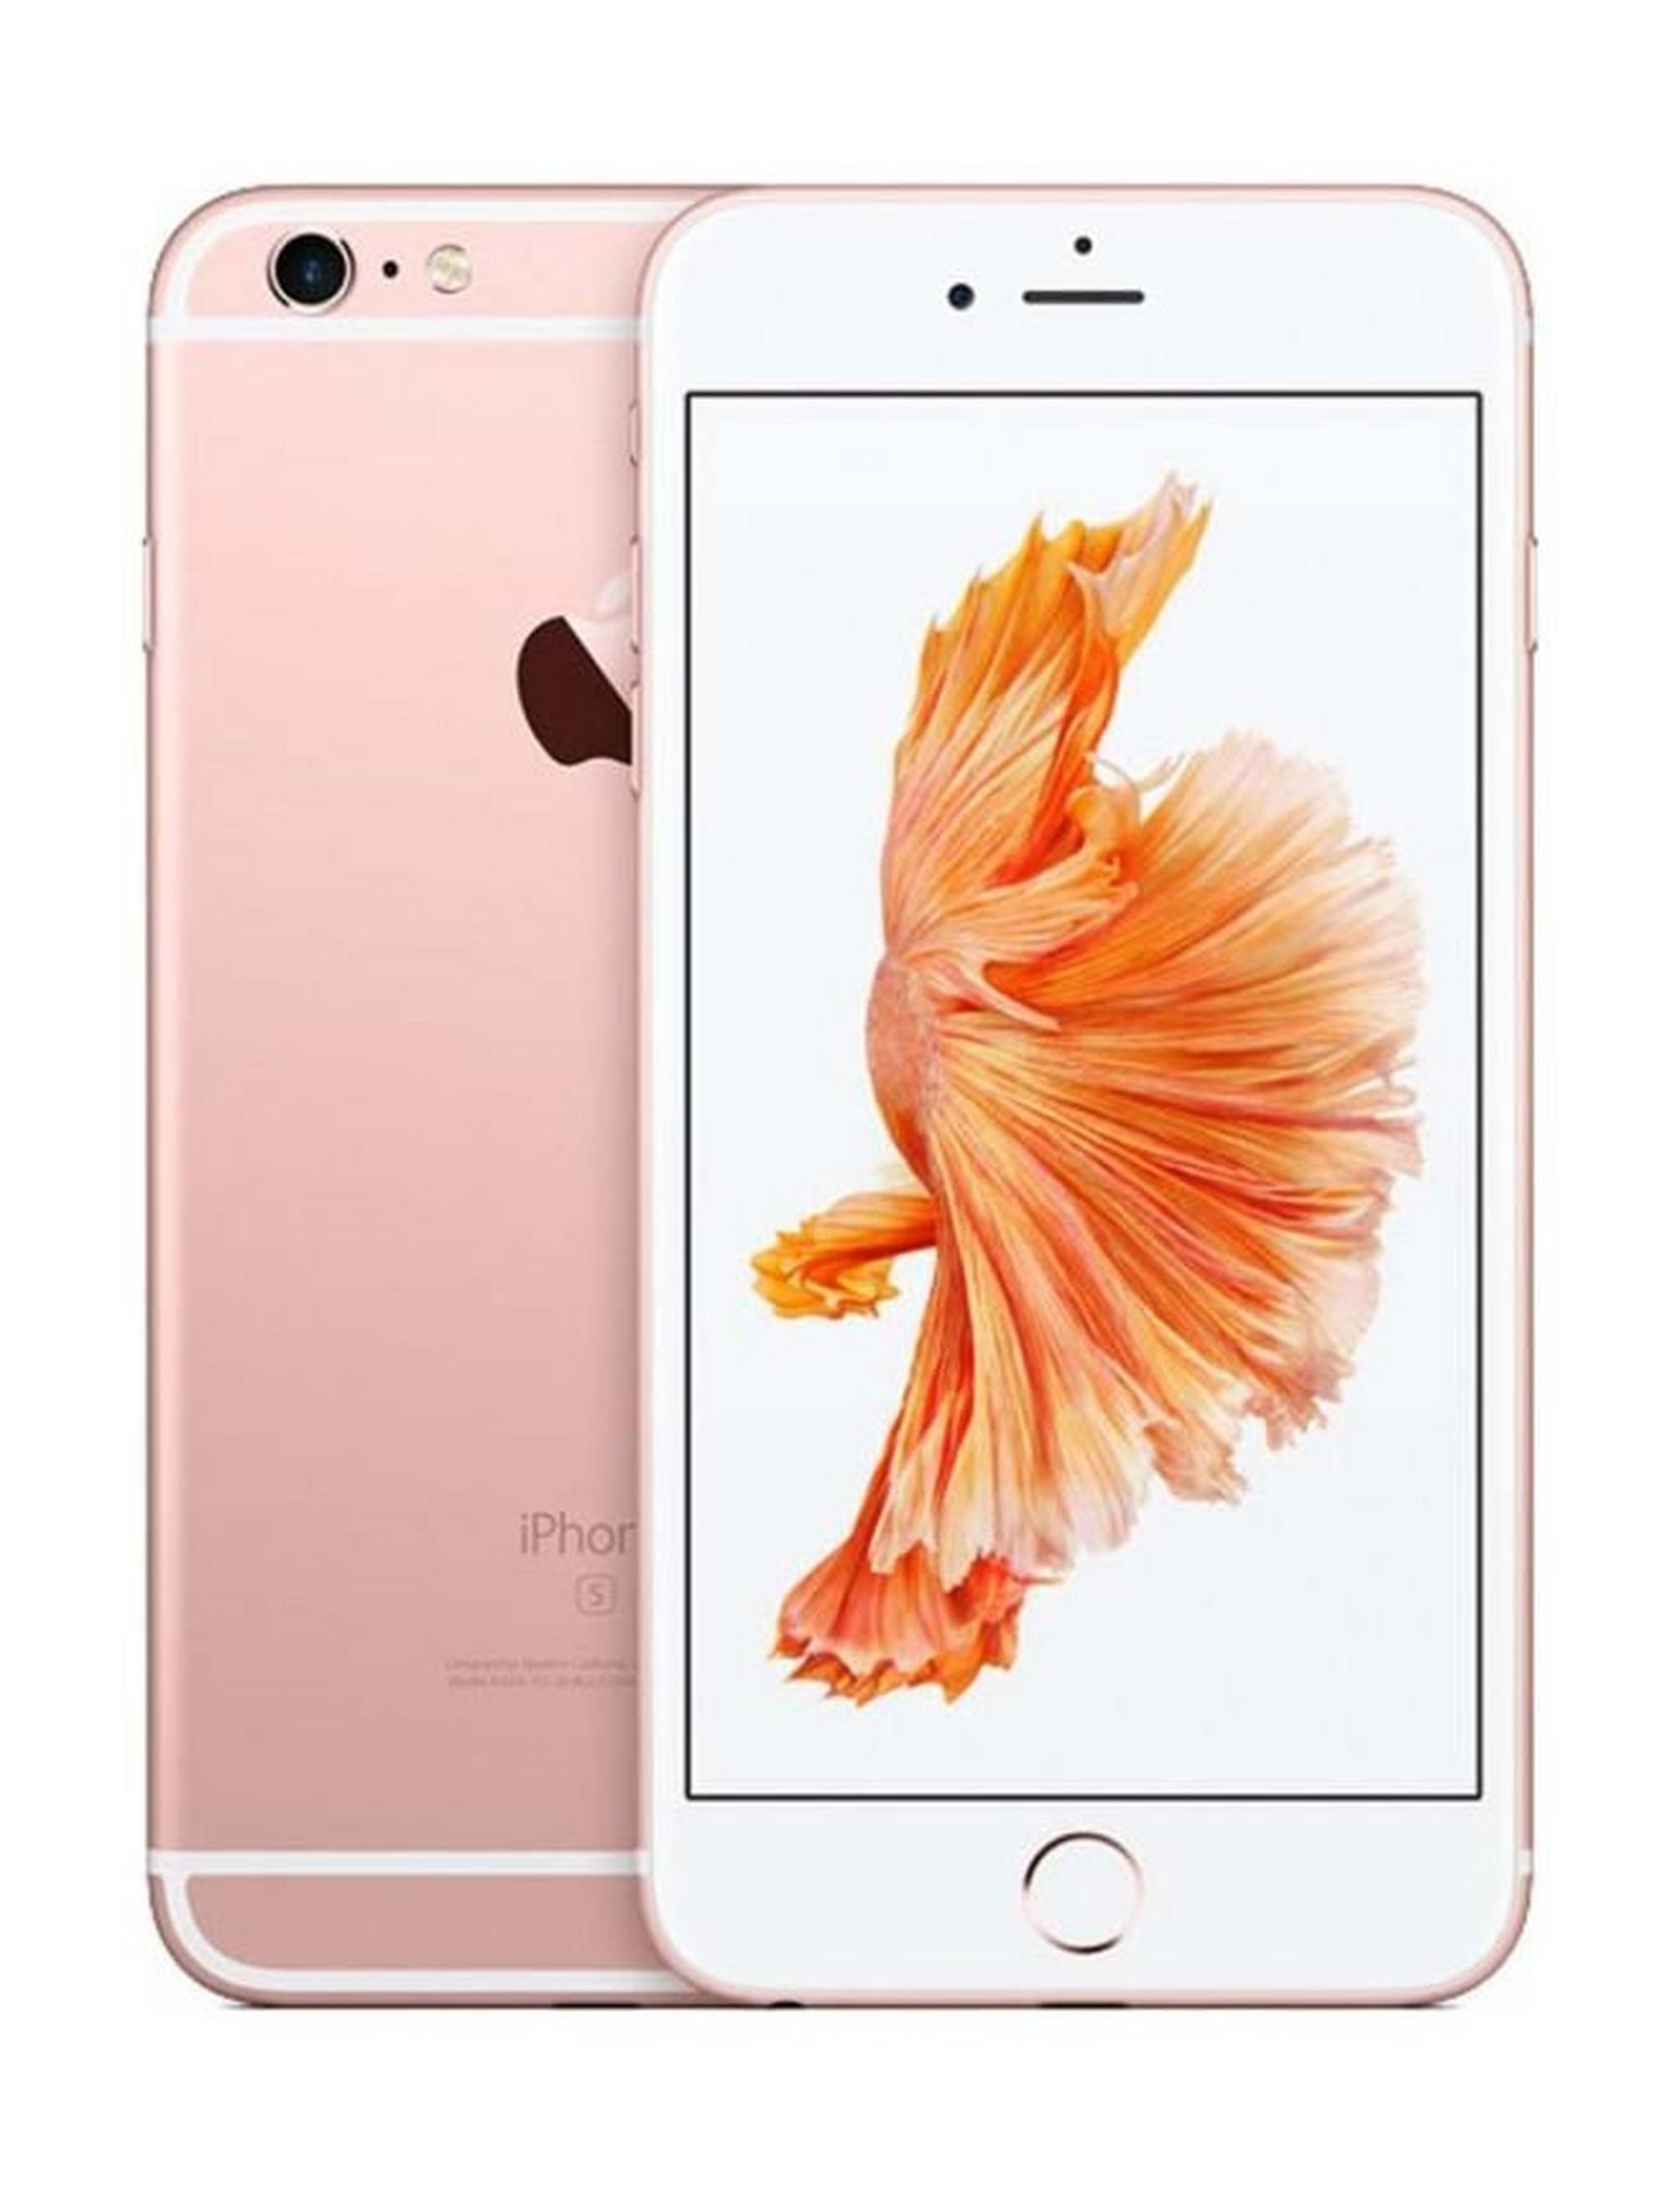 Apple iPhone 6S 64GB 12MP 4G LTE 4.7-inch Smartphone - Rose Gold